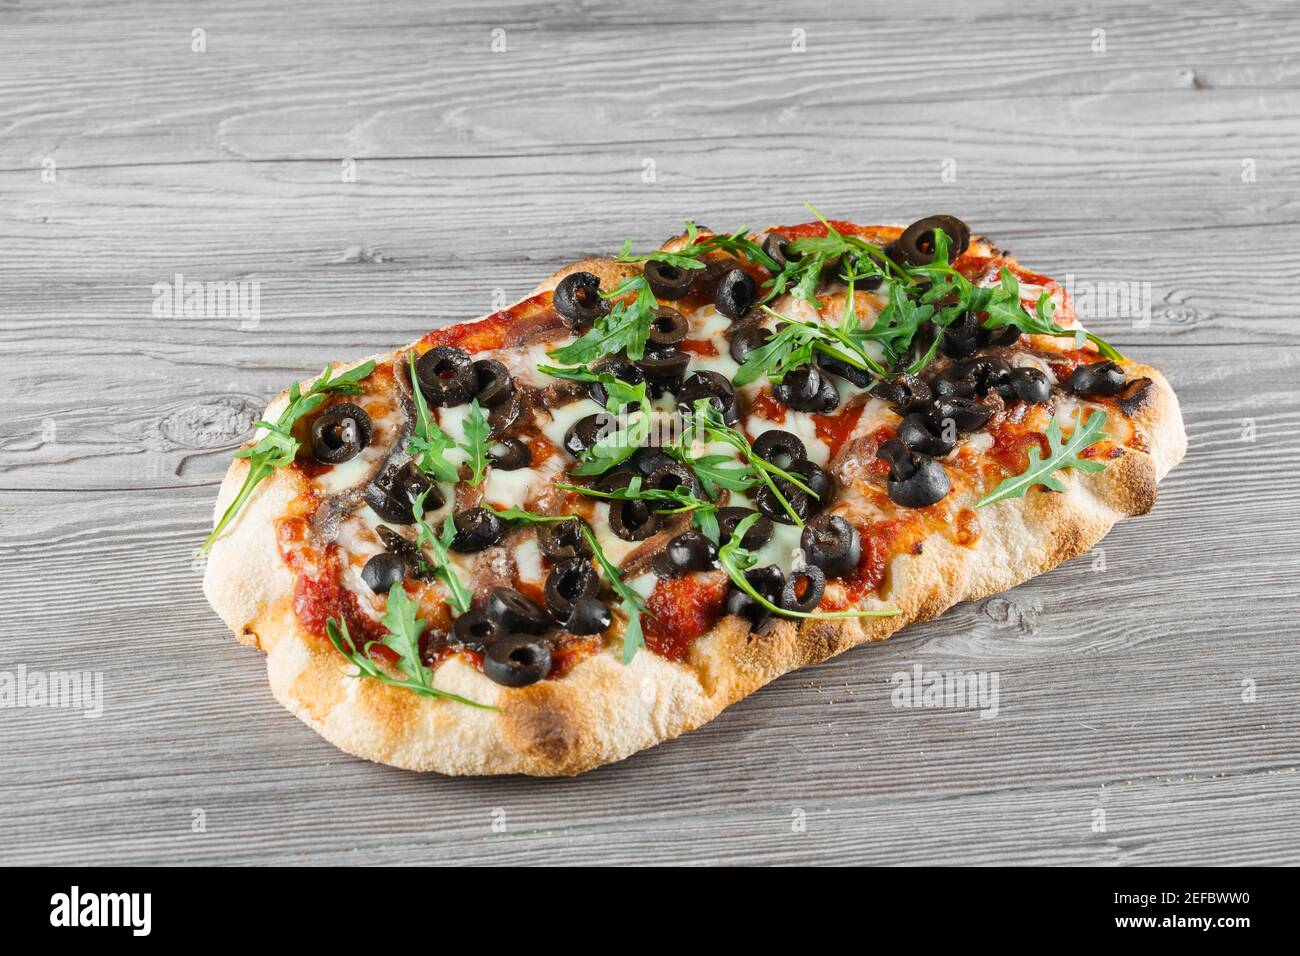 meat, from on wooden gourmet italian with Photo arugula delivery cuisine Alamy Pinsa traditional dish. Scrocchiarella Food pizzeria. Pinsa - Stock grey background. romana